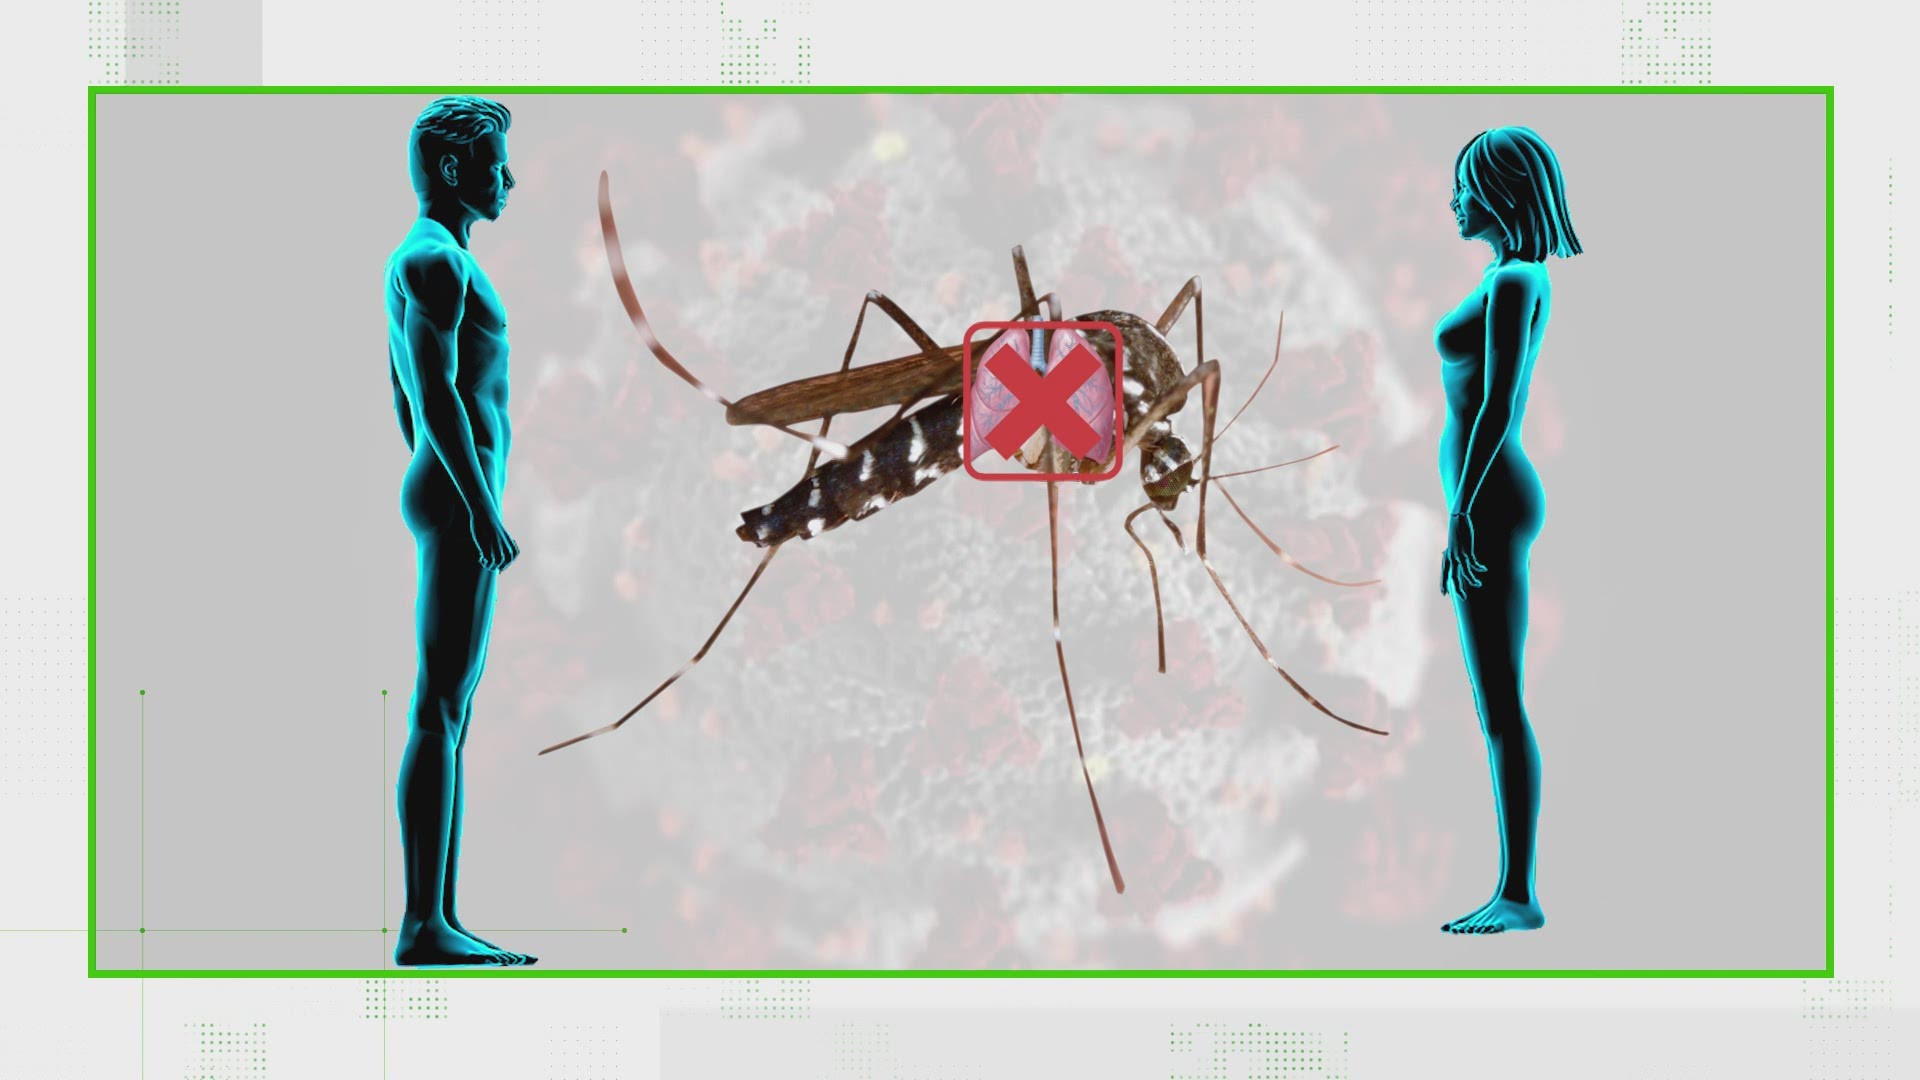 A mosquito is an insect. It doesn't have lungs. It breathes through its exoskeleton, so it can’t spread a virus through the air.